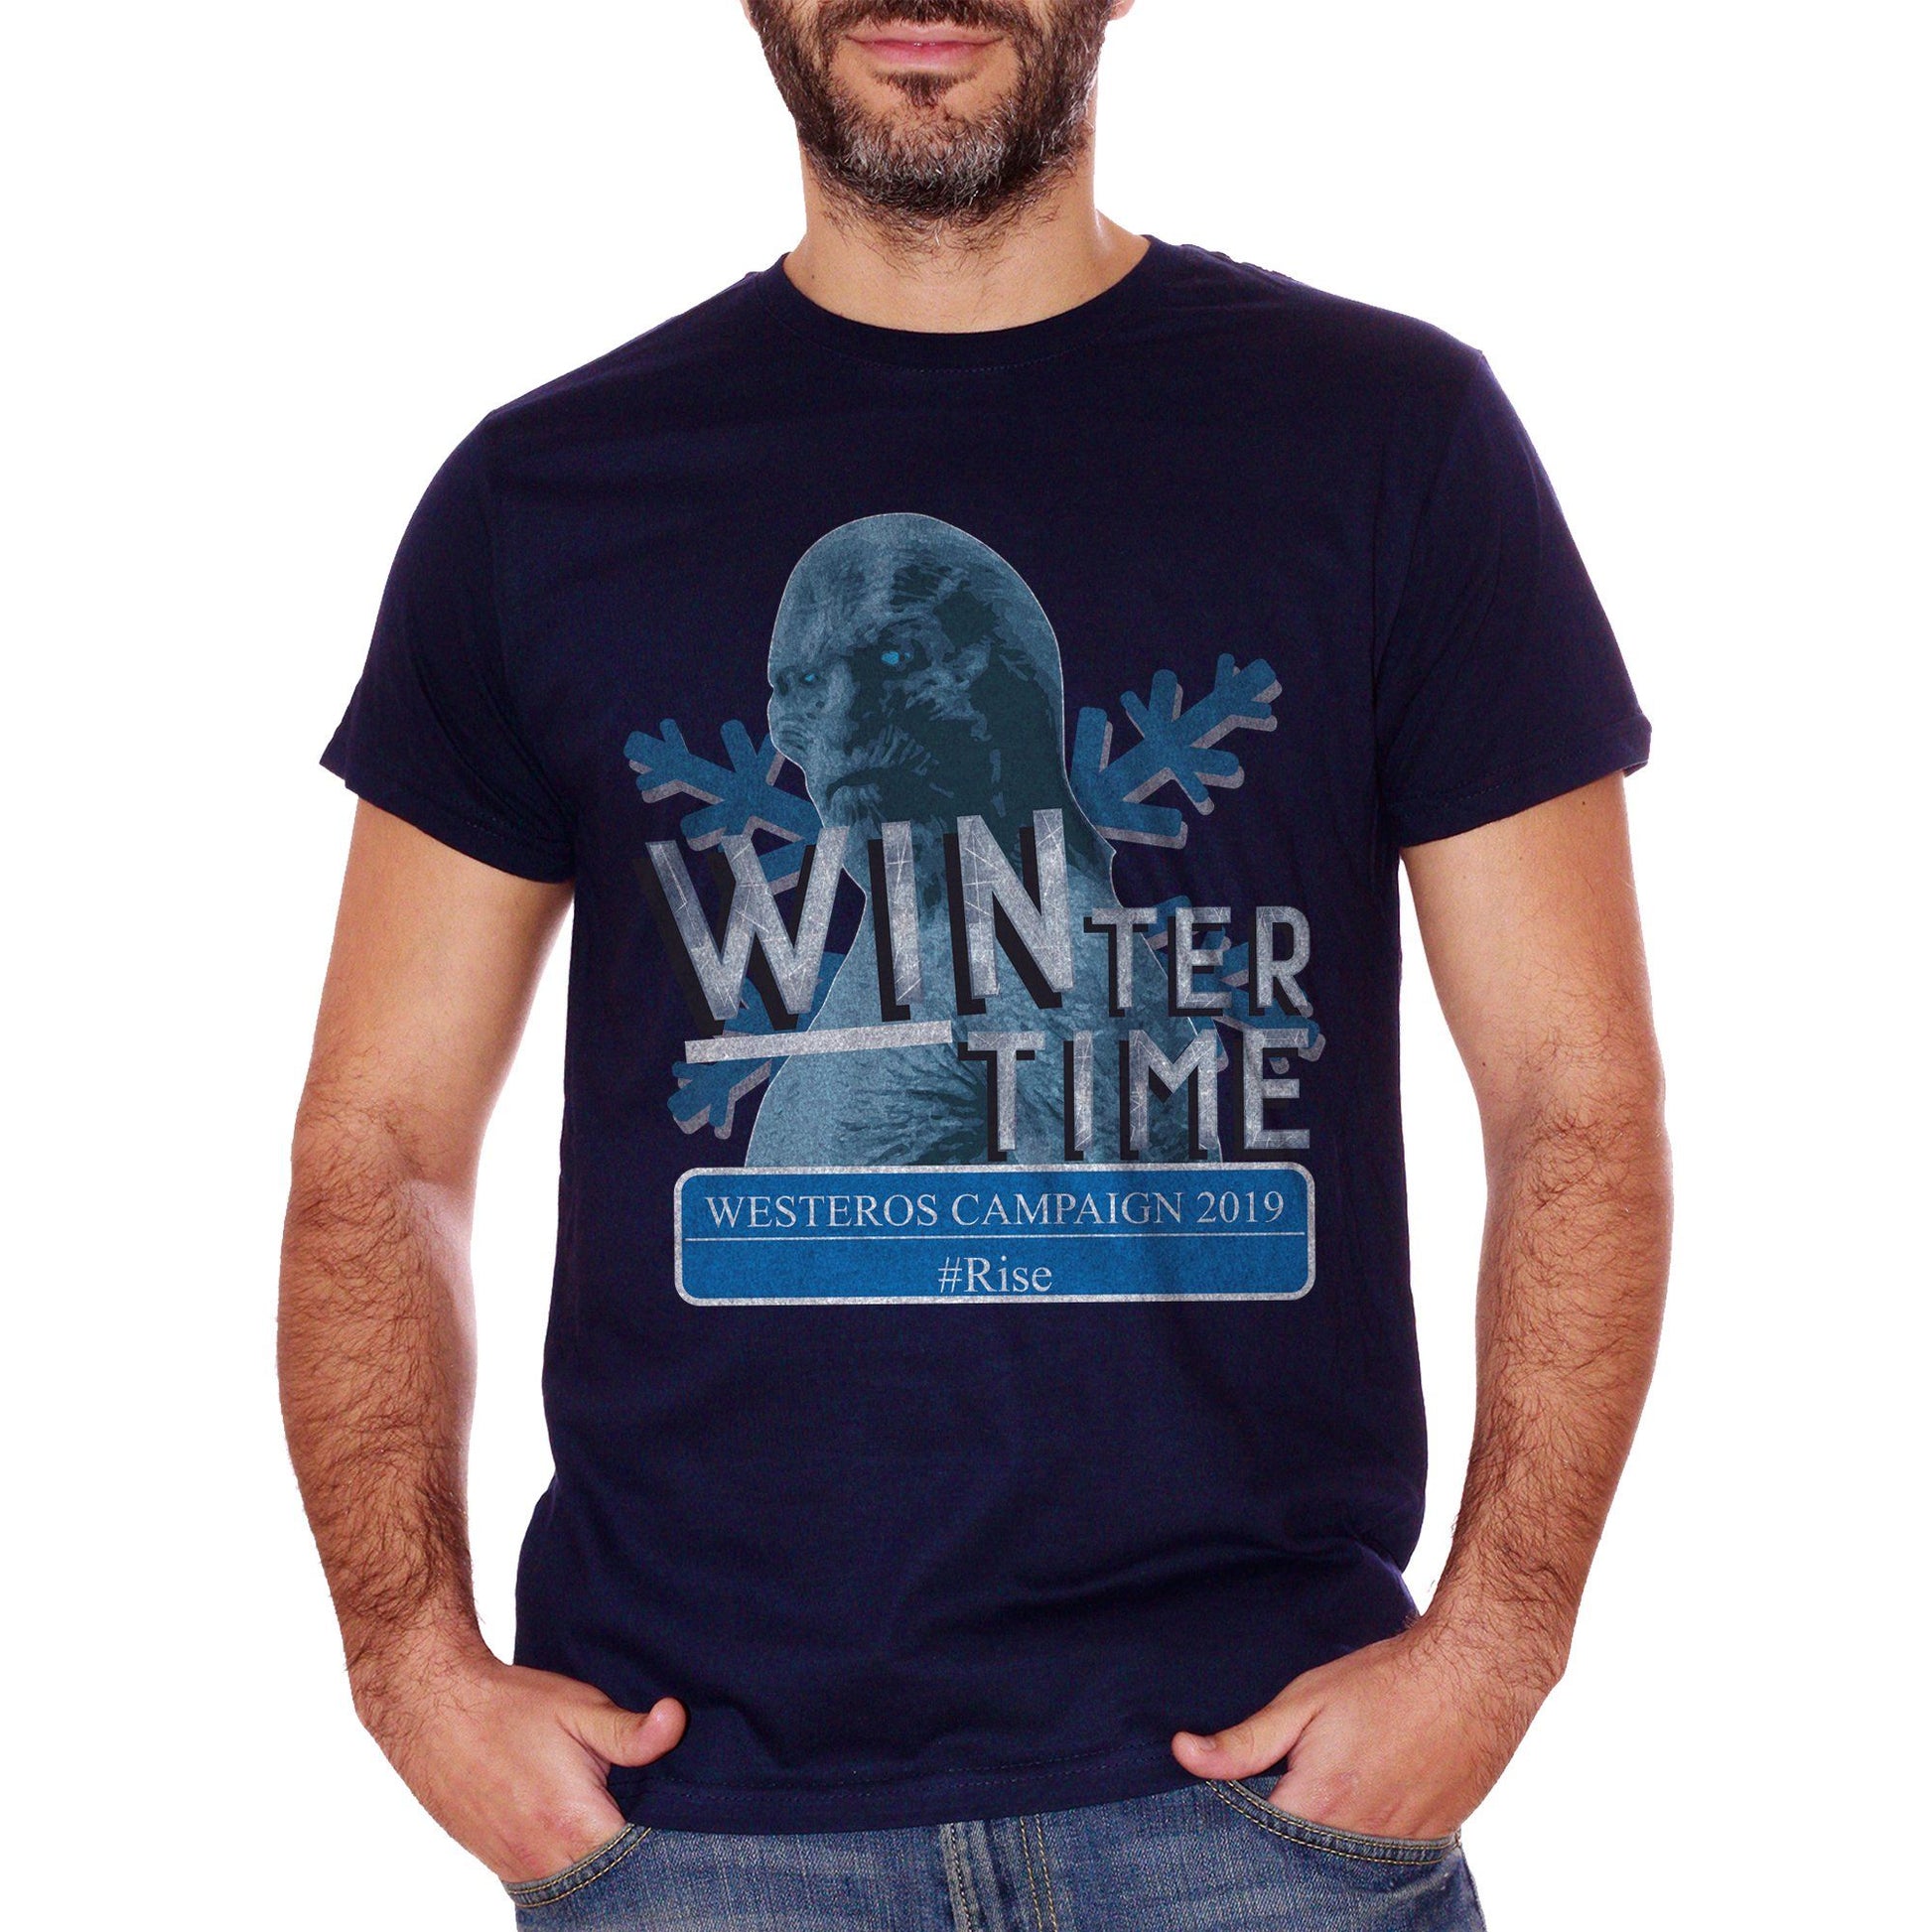 Black T-Shirt White Walker Winter Westeros Campaign 2019 Game Of Thrones - FILM CucShop